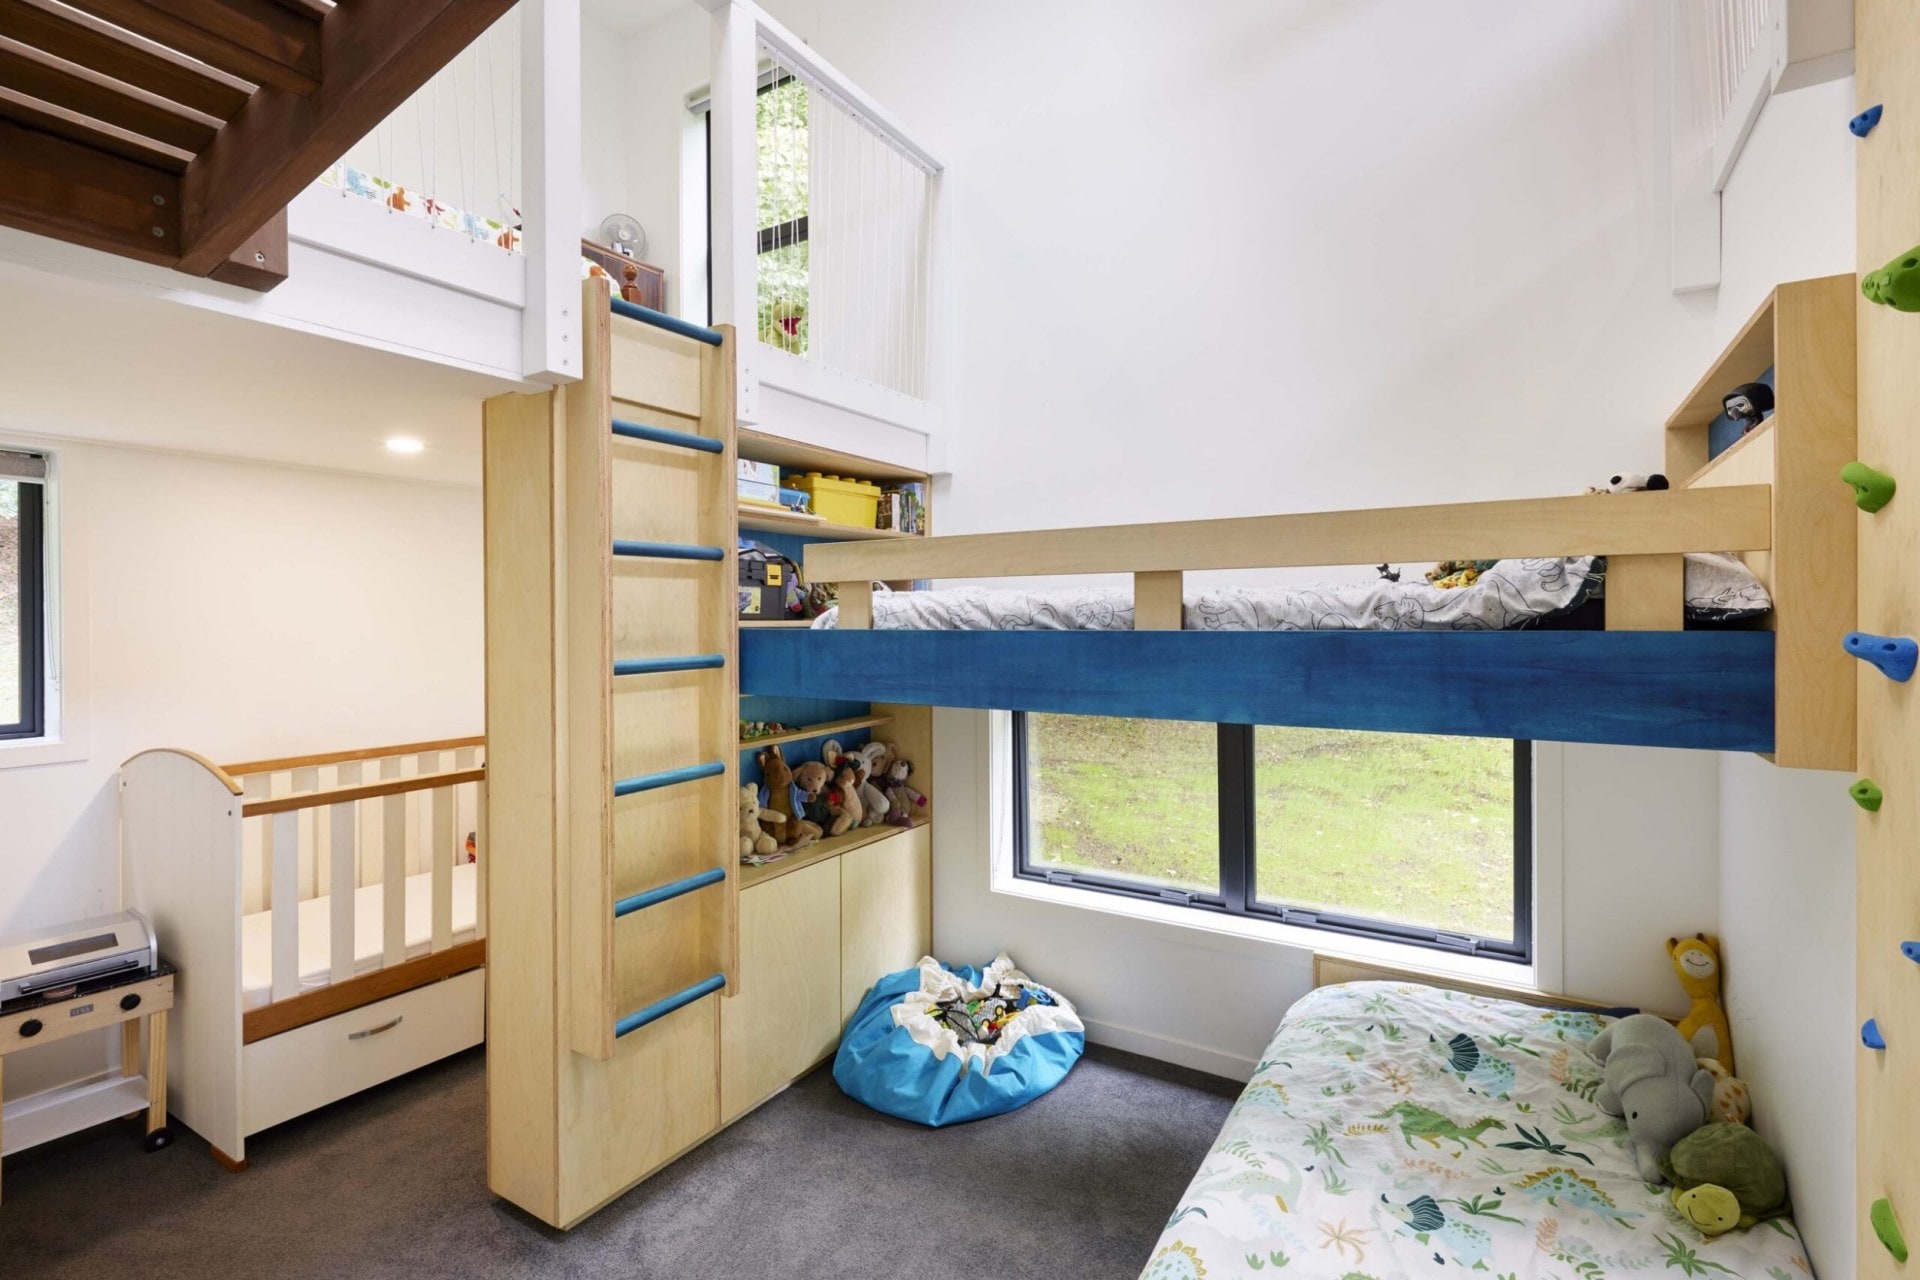 A children's room with a cot, multiple beds and a rock climbing wall